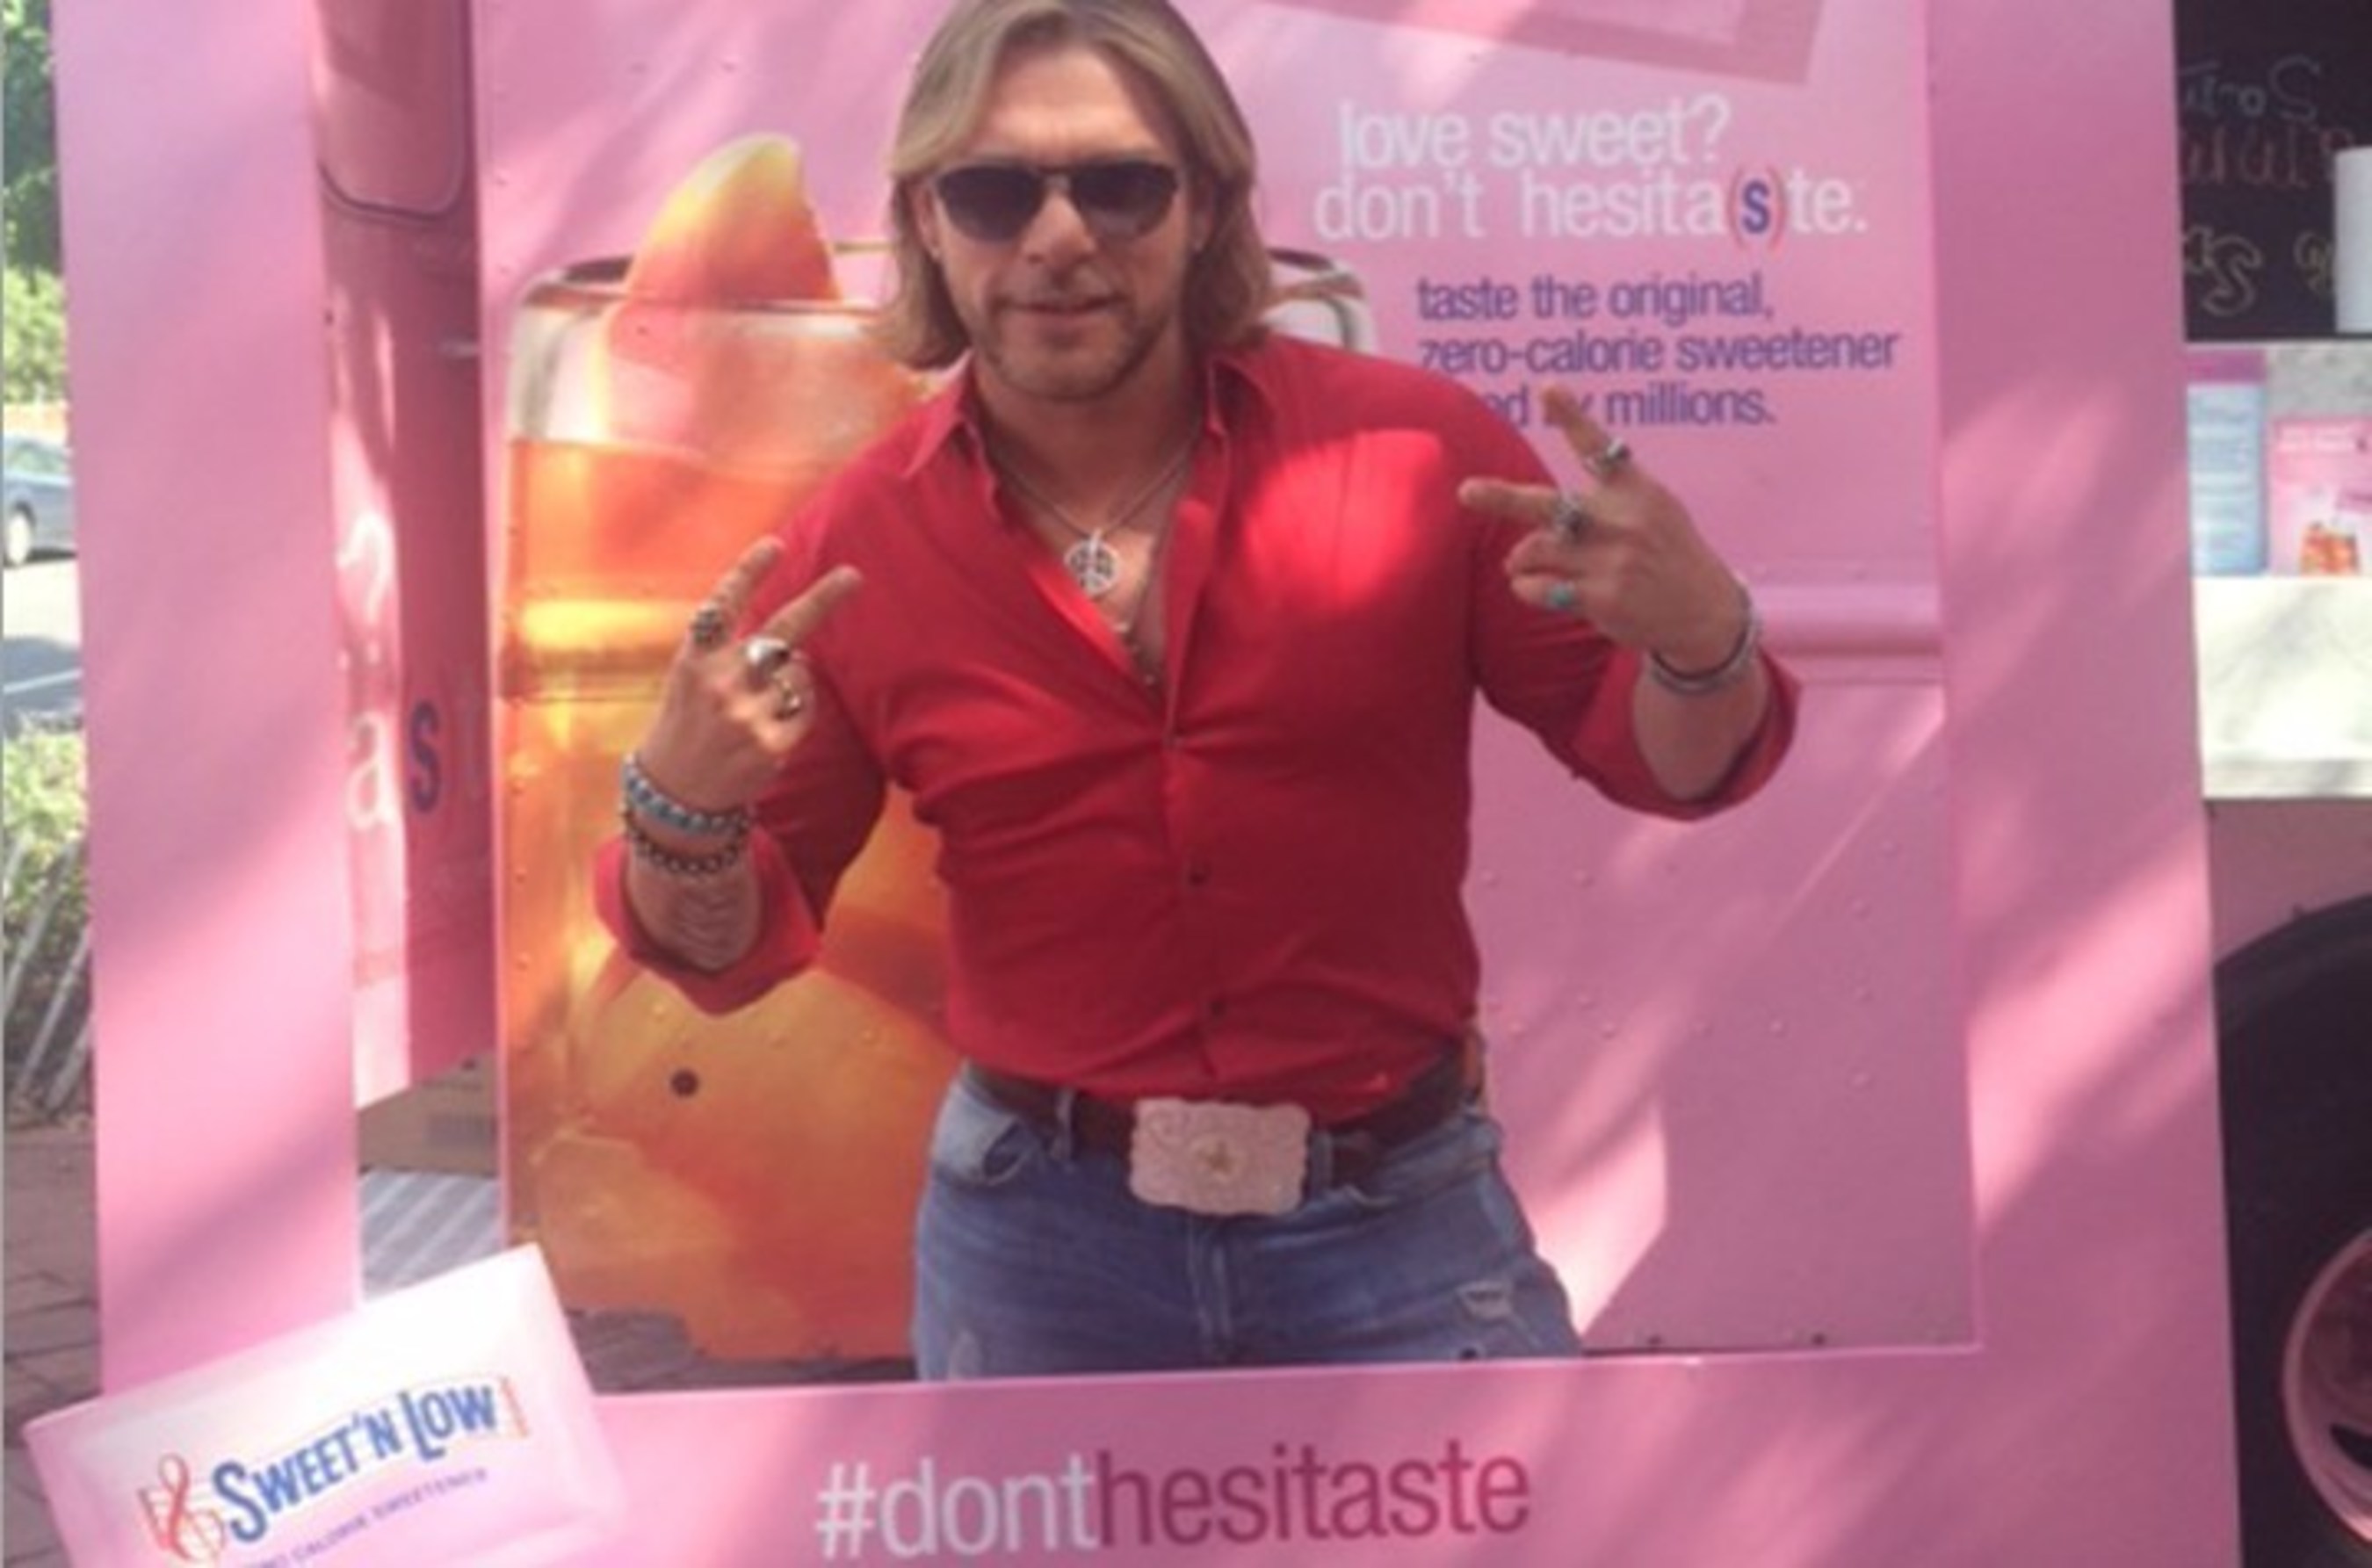 Craig Wayne Boyd, country musician and Season 7 winner of The Voice, enjoyed the Philadelphia stop on Sweet'N Low's Don't Hesita(s)te Tour. Boyd visited the tour at Spruce Street Park where fans sampled Sweet'N Low-sweetened iced tea, played games, and more. For each sample tasted along the 24-city tour a donation was made to Big Brothers Big Sisters.